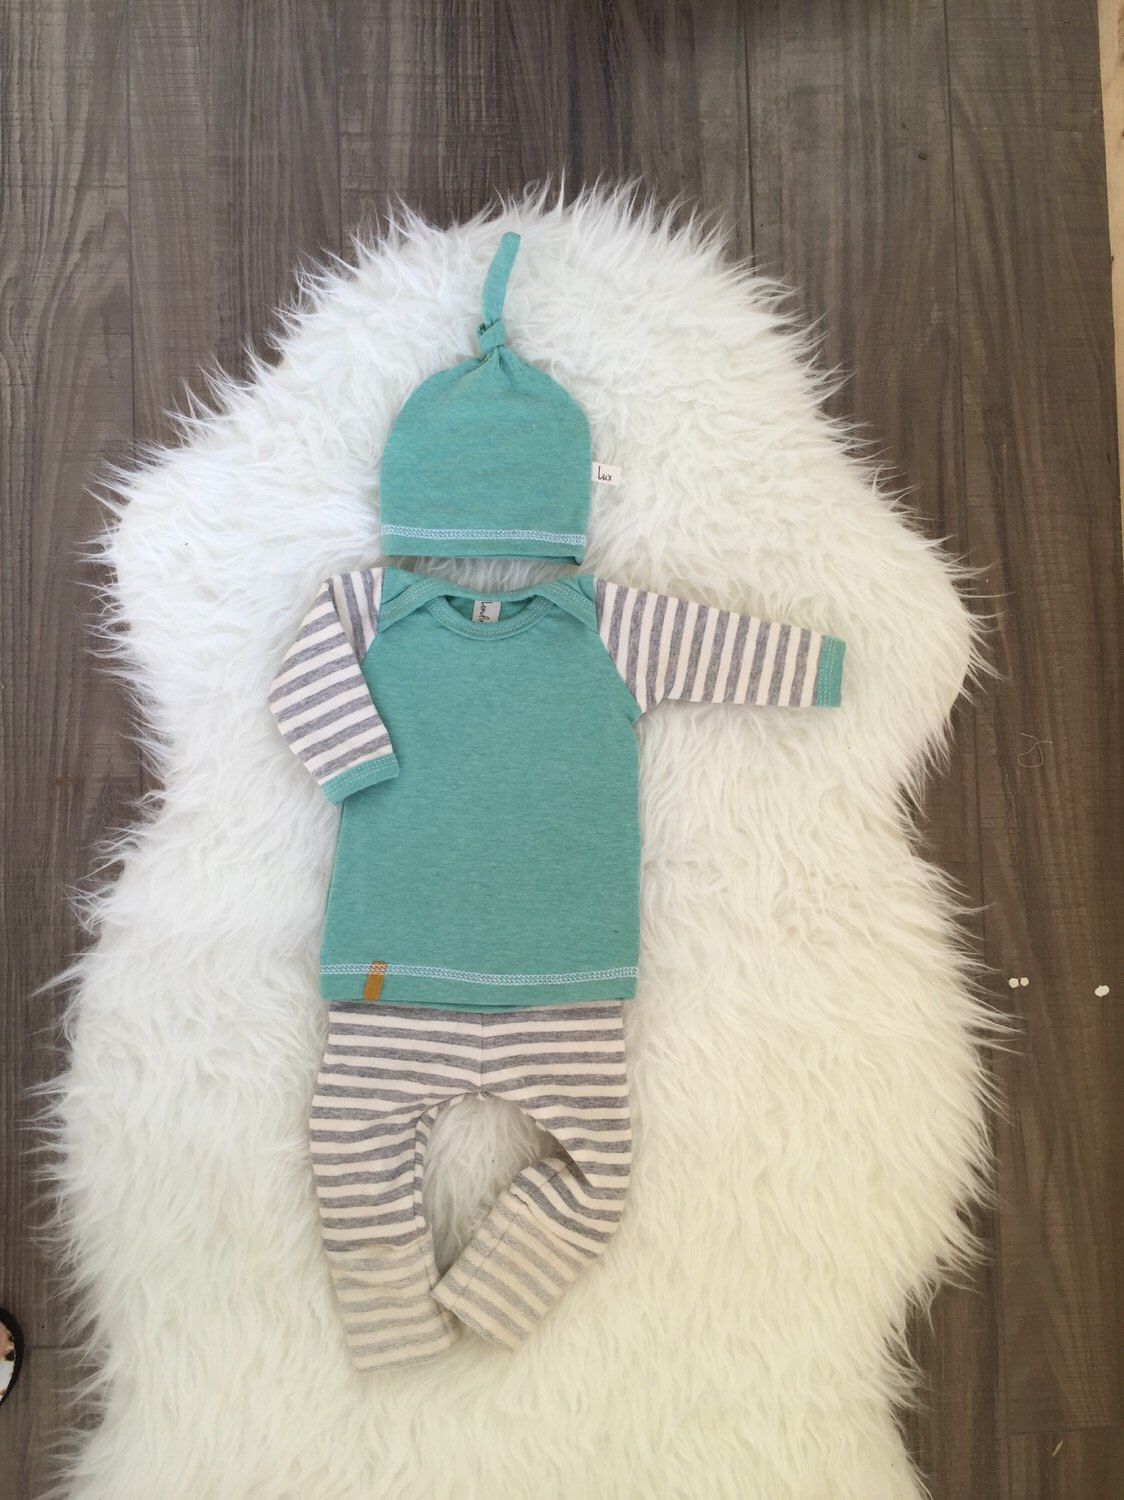 Baby boy coming home outfit! Boys take home outfit, pants shirt and matching top knot hat. Size Newborn **Made to Order**